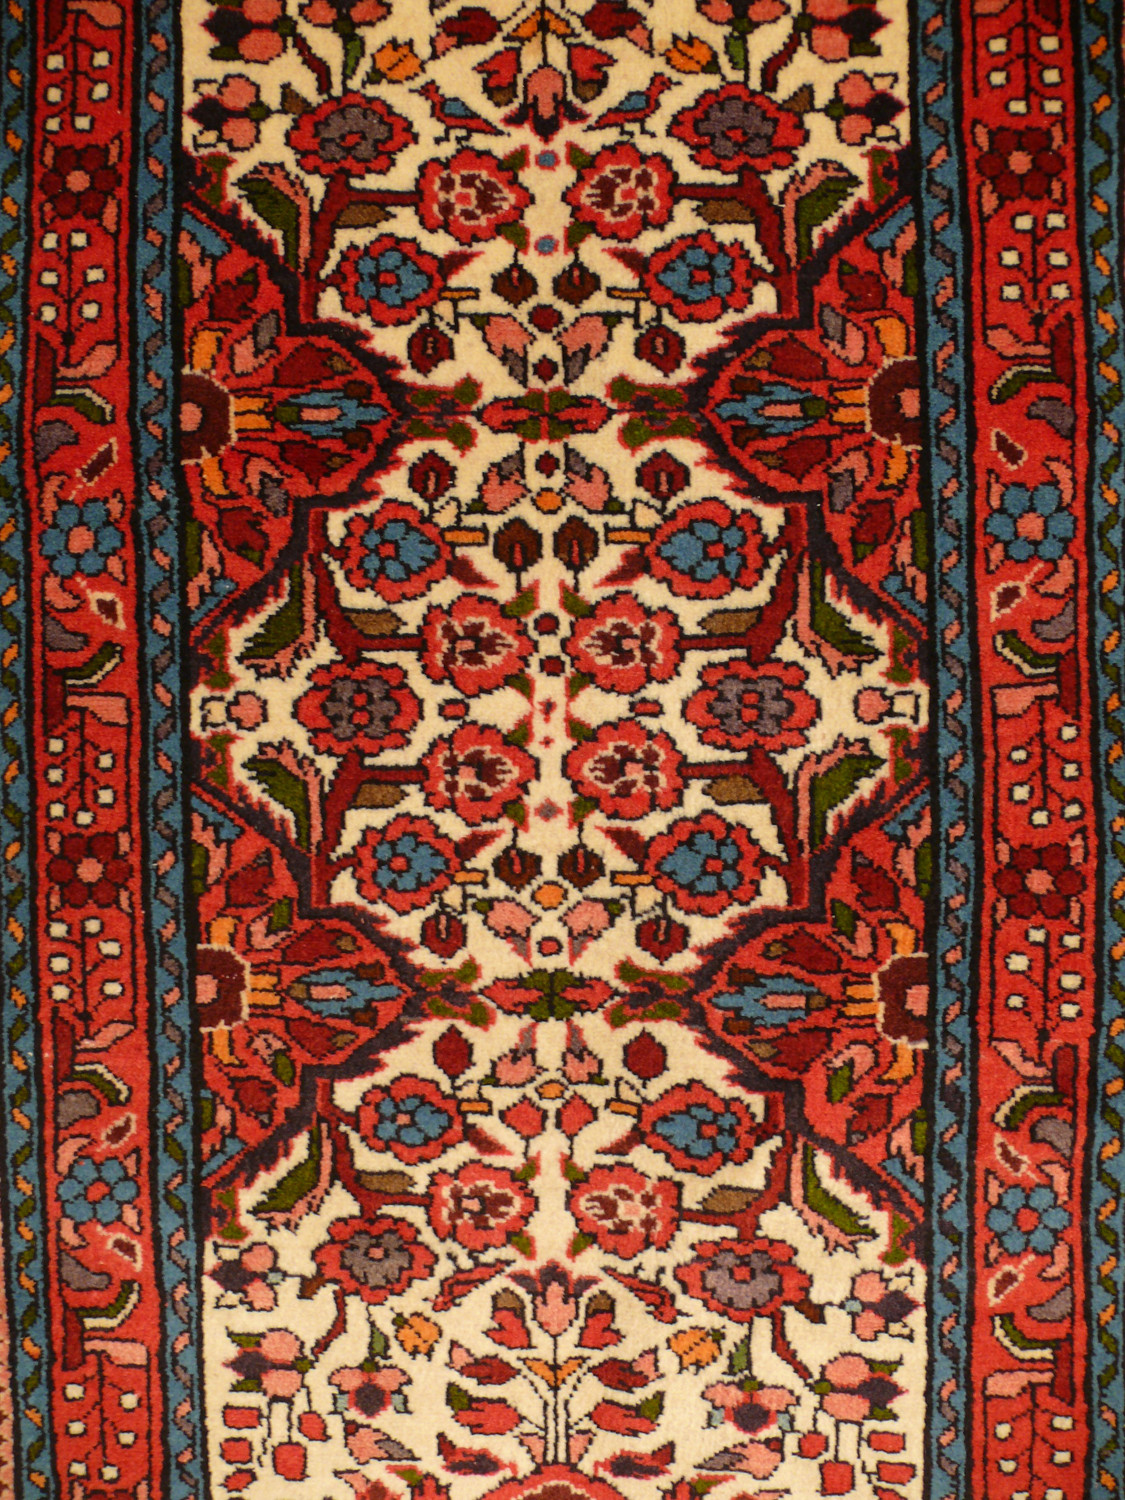 Hand-Knotted Persian Runner Rug - Traditional Rudbar Weaving Techniques | Rugs.net